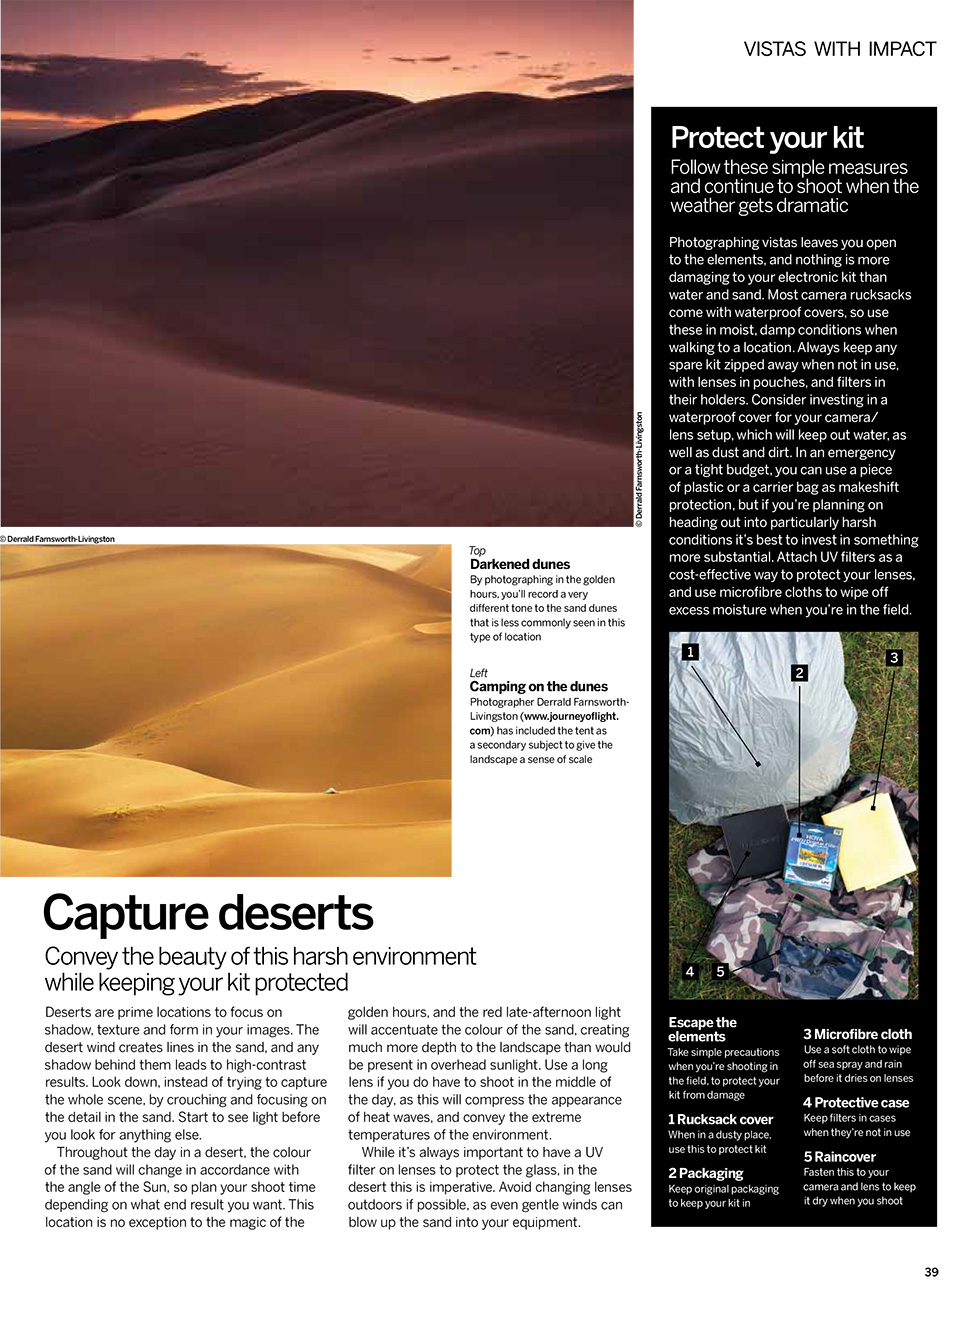 Vistas With Impact - Digital Photographer UK Article.  Contributed Photography (3 images). -  Photography